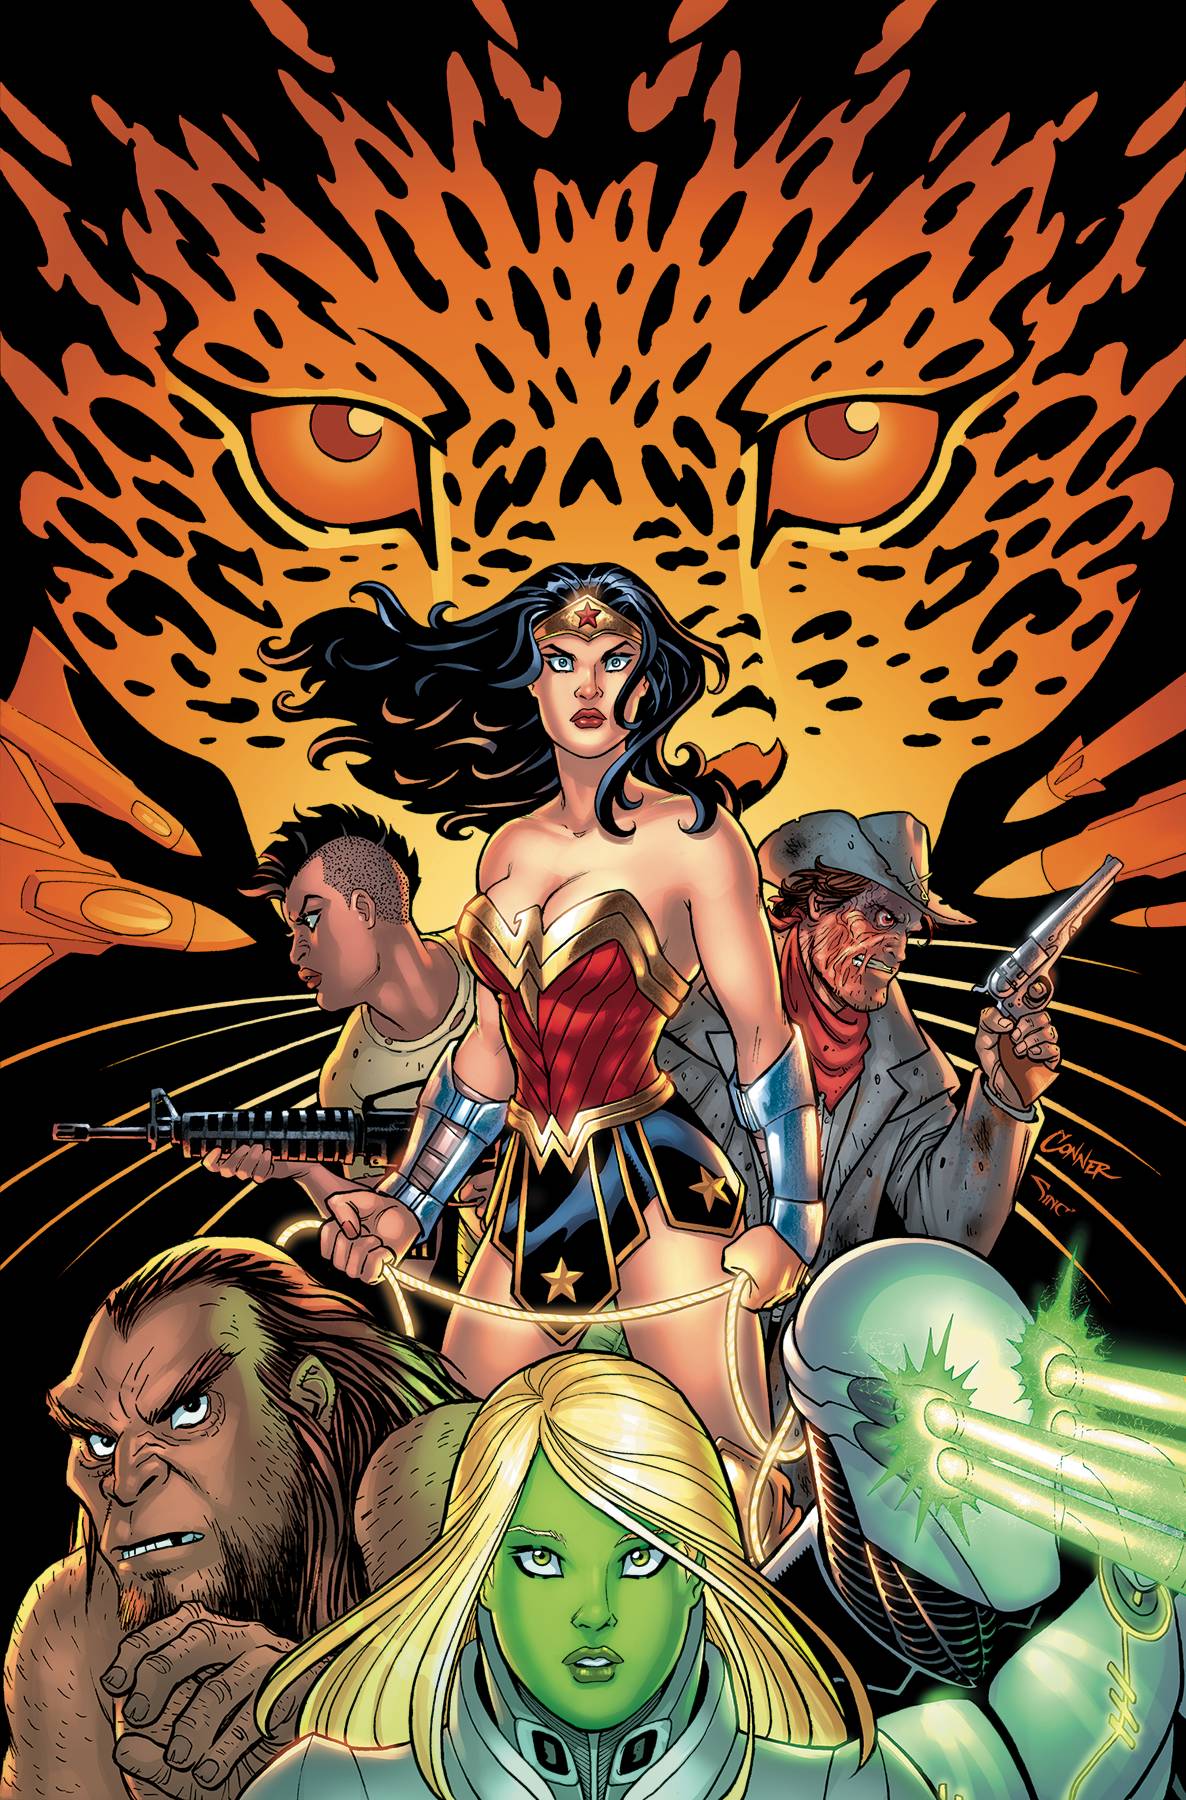 WONDER WOMAN COME BACK TO ME #2 (OF 6) 08/21/19 FOC 07/29/19